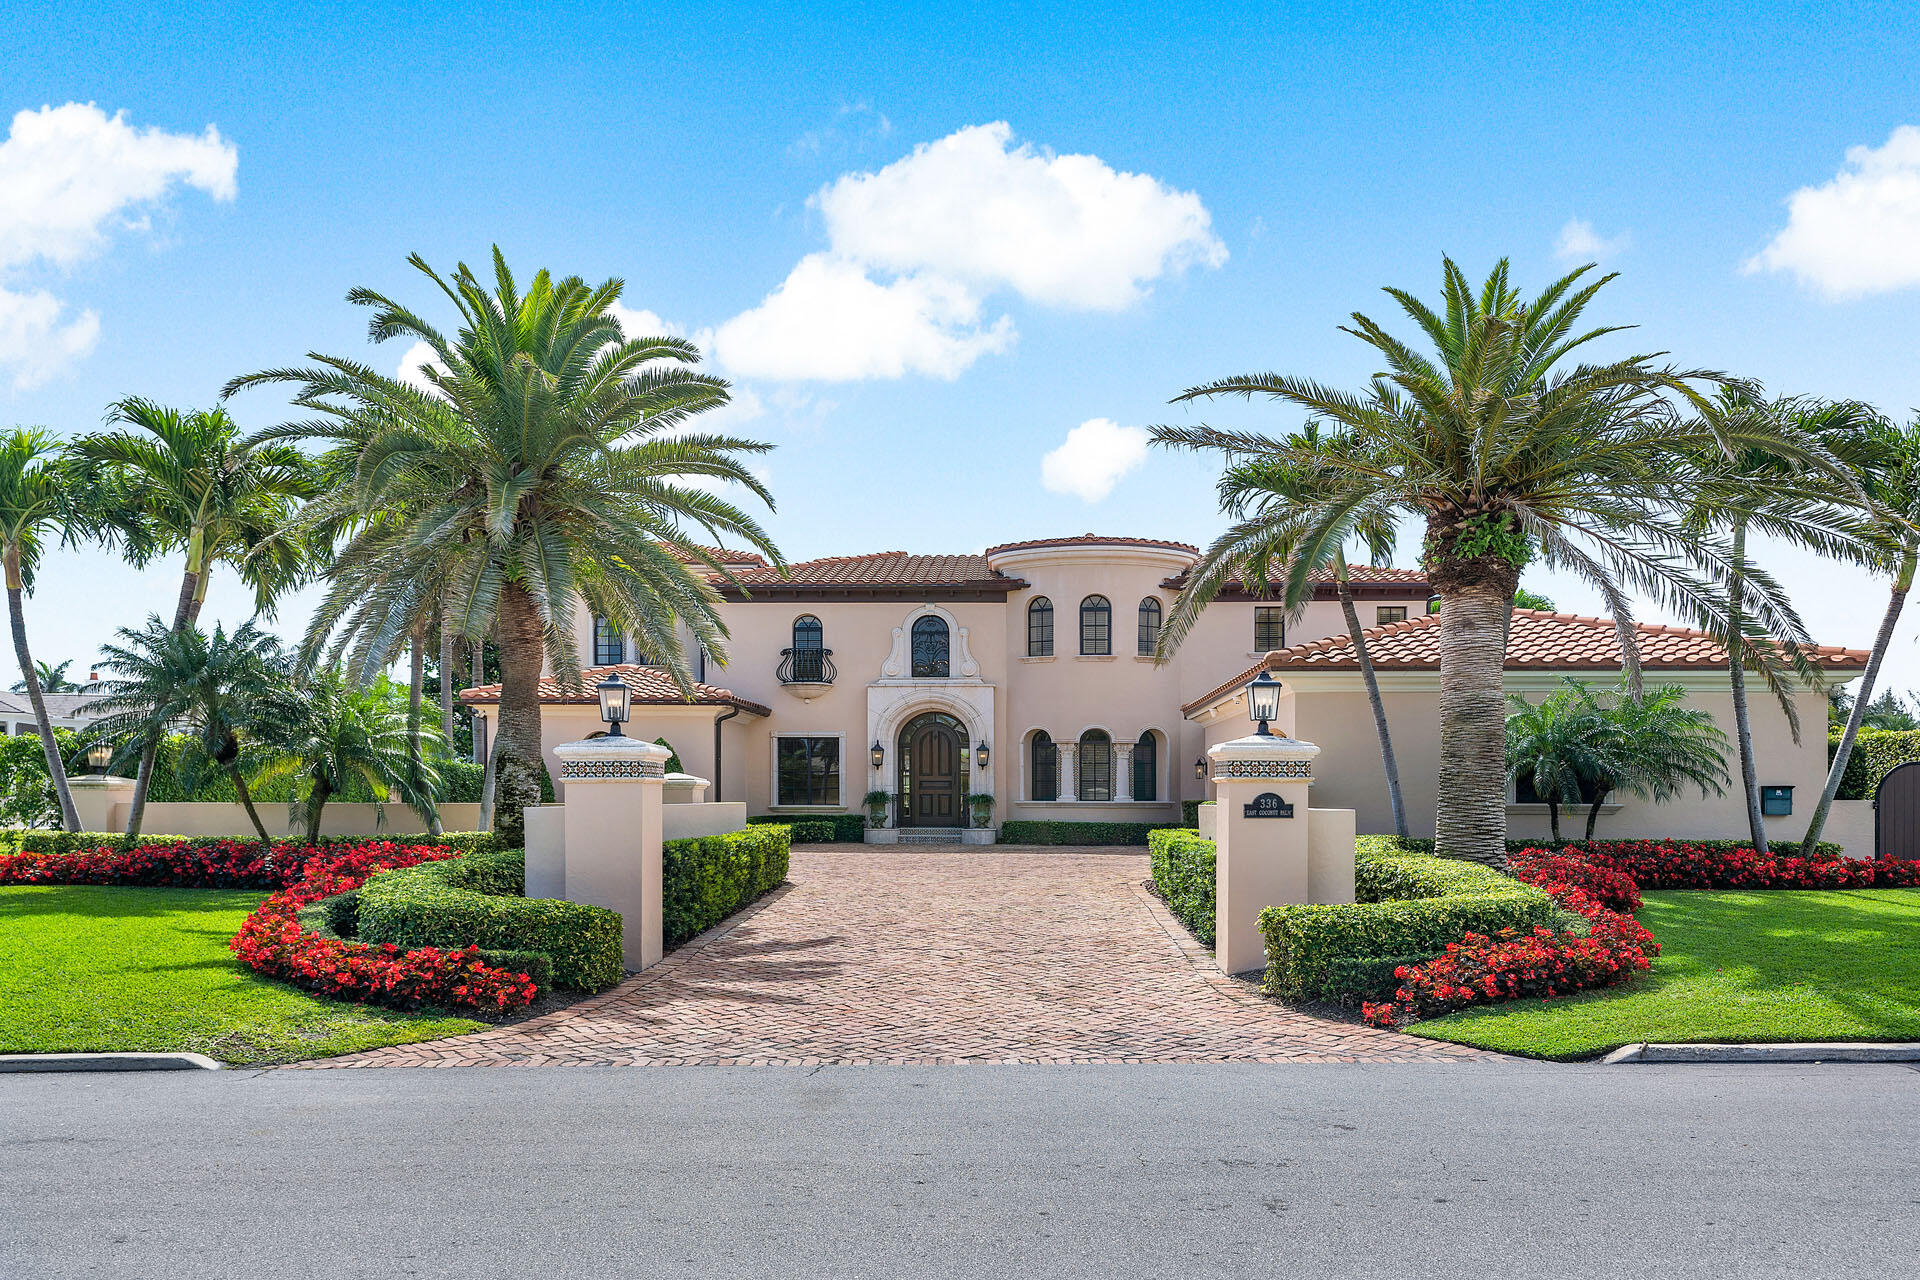 Property for Sale at 336 E Coconut Palm Road, Boca Raton, Palm Beach County, Florida - Bedrooms: 5 
Bathrooms: 5.5  - $12,750,000